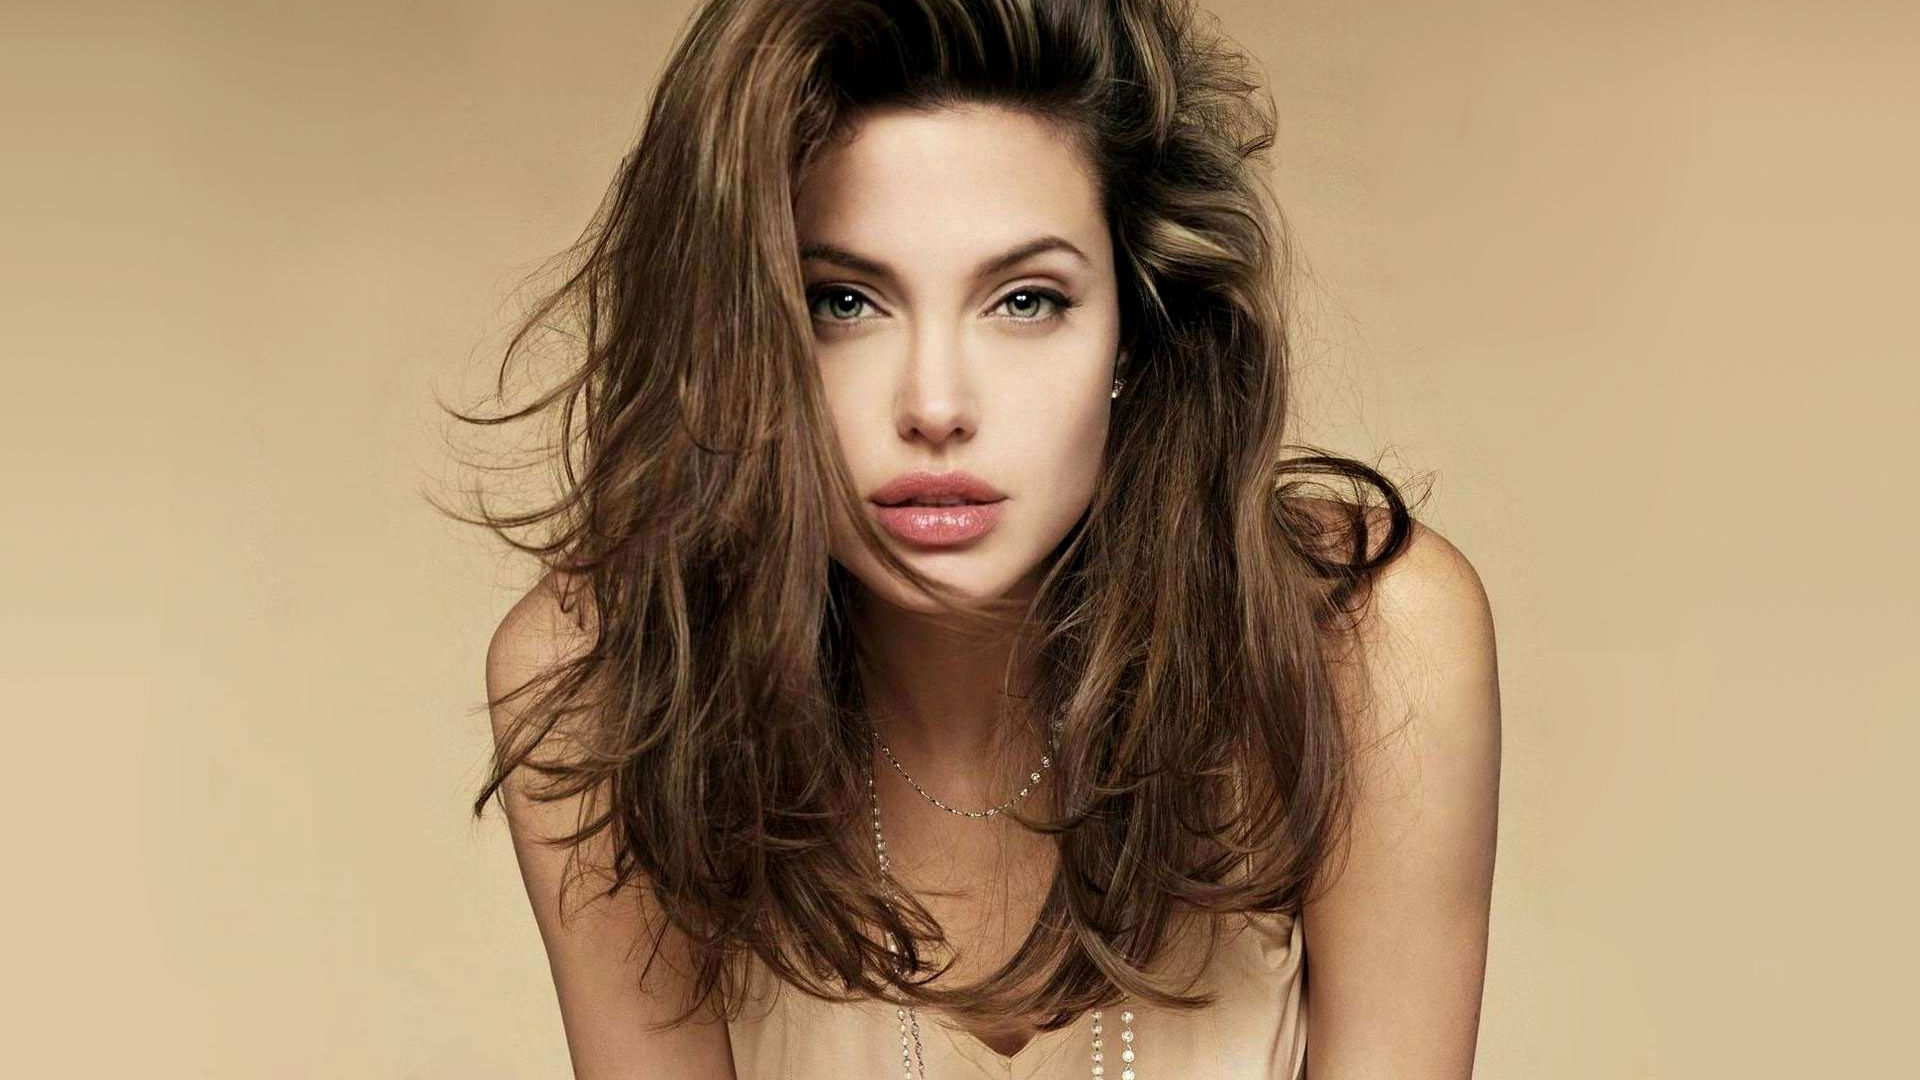 Wallpapers angelina jolie hair curly on the desktop